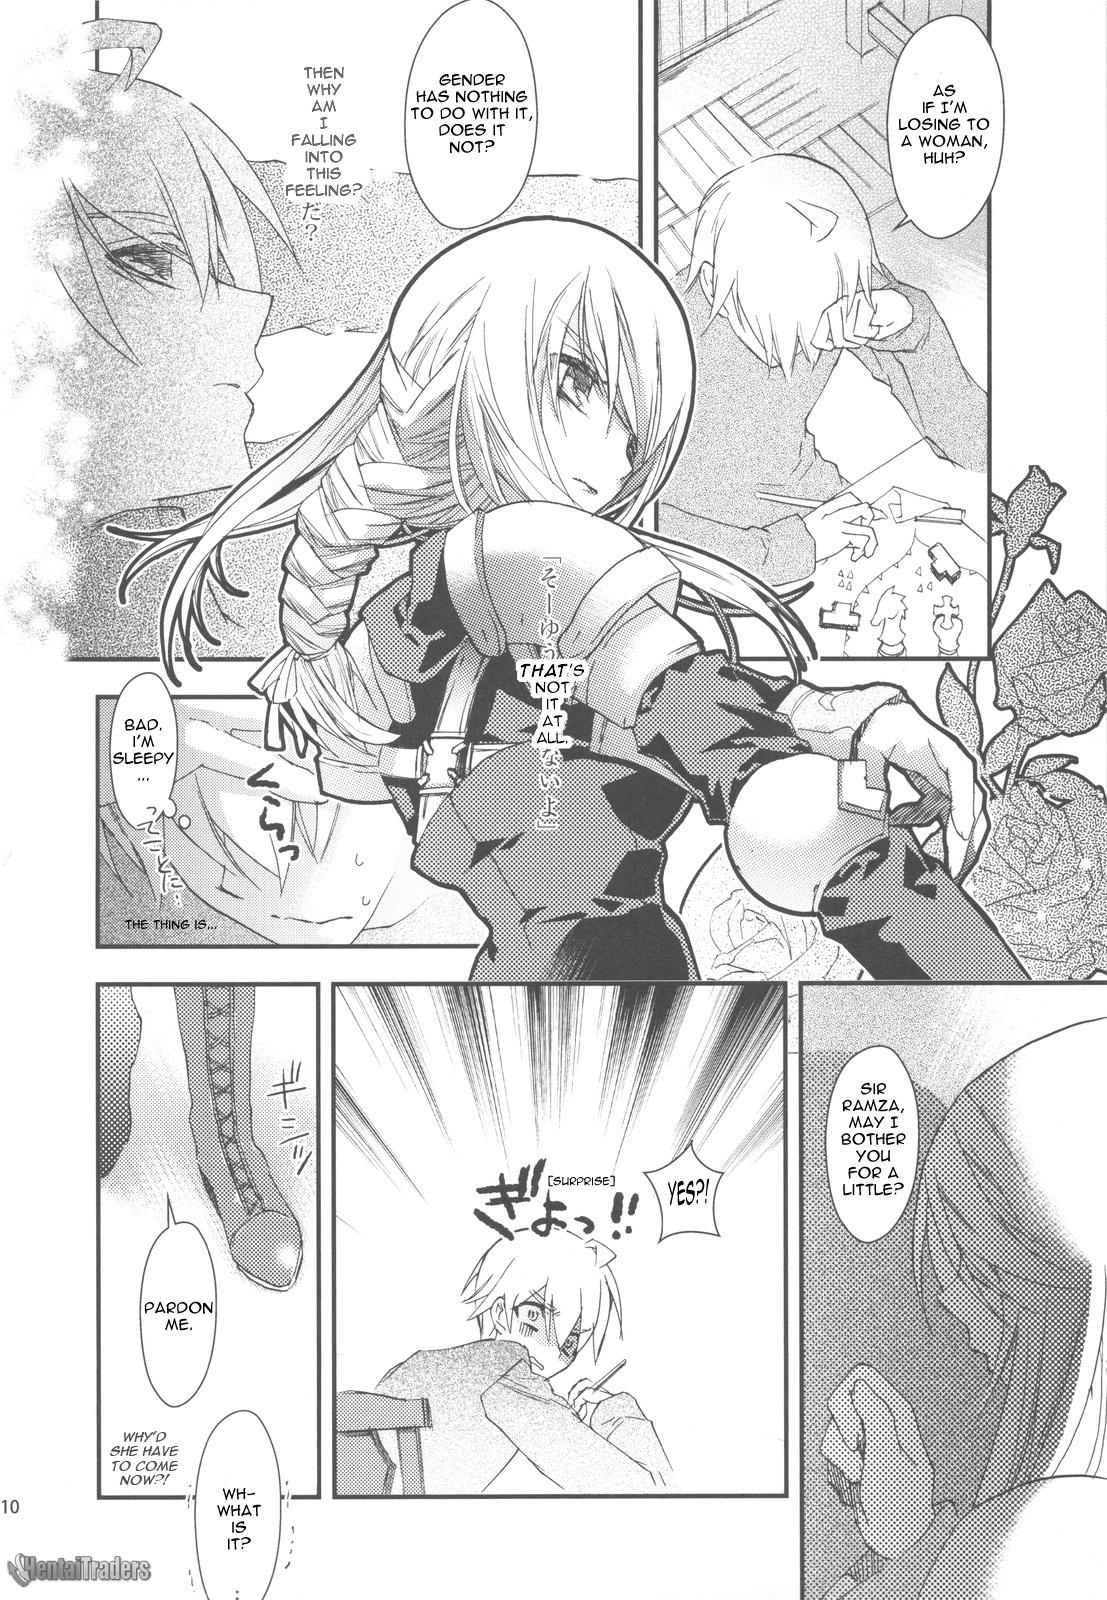 Whipping NamelessDance with Agrius - Final fantasy tactics Jockstrap - Page 10